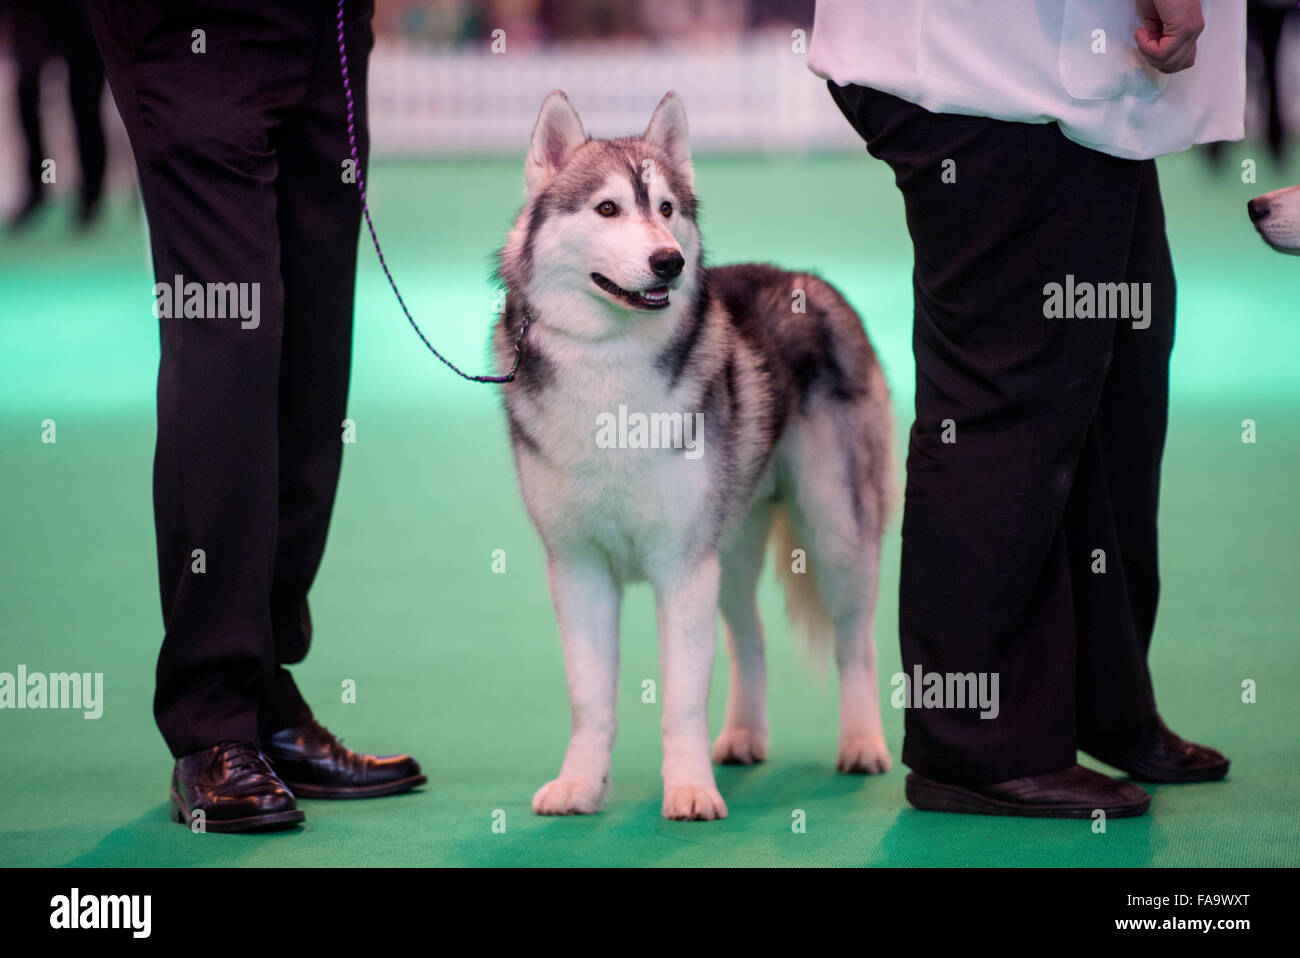 Crufts dog show at the NEC, Birmingham - a Siberian Husky dog showing in the Breeders Cup section UK 2015 Stock Photo